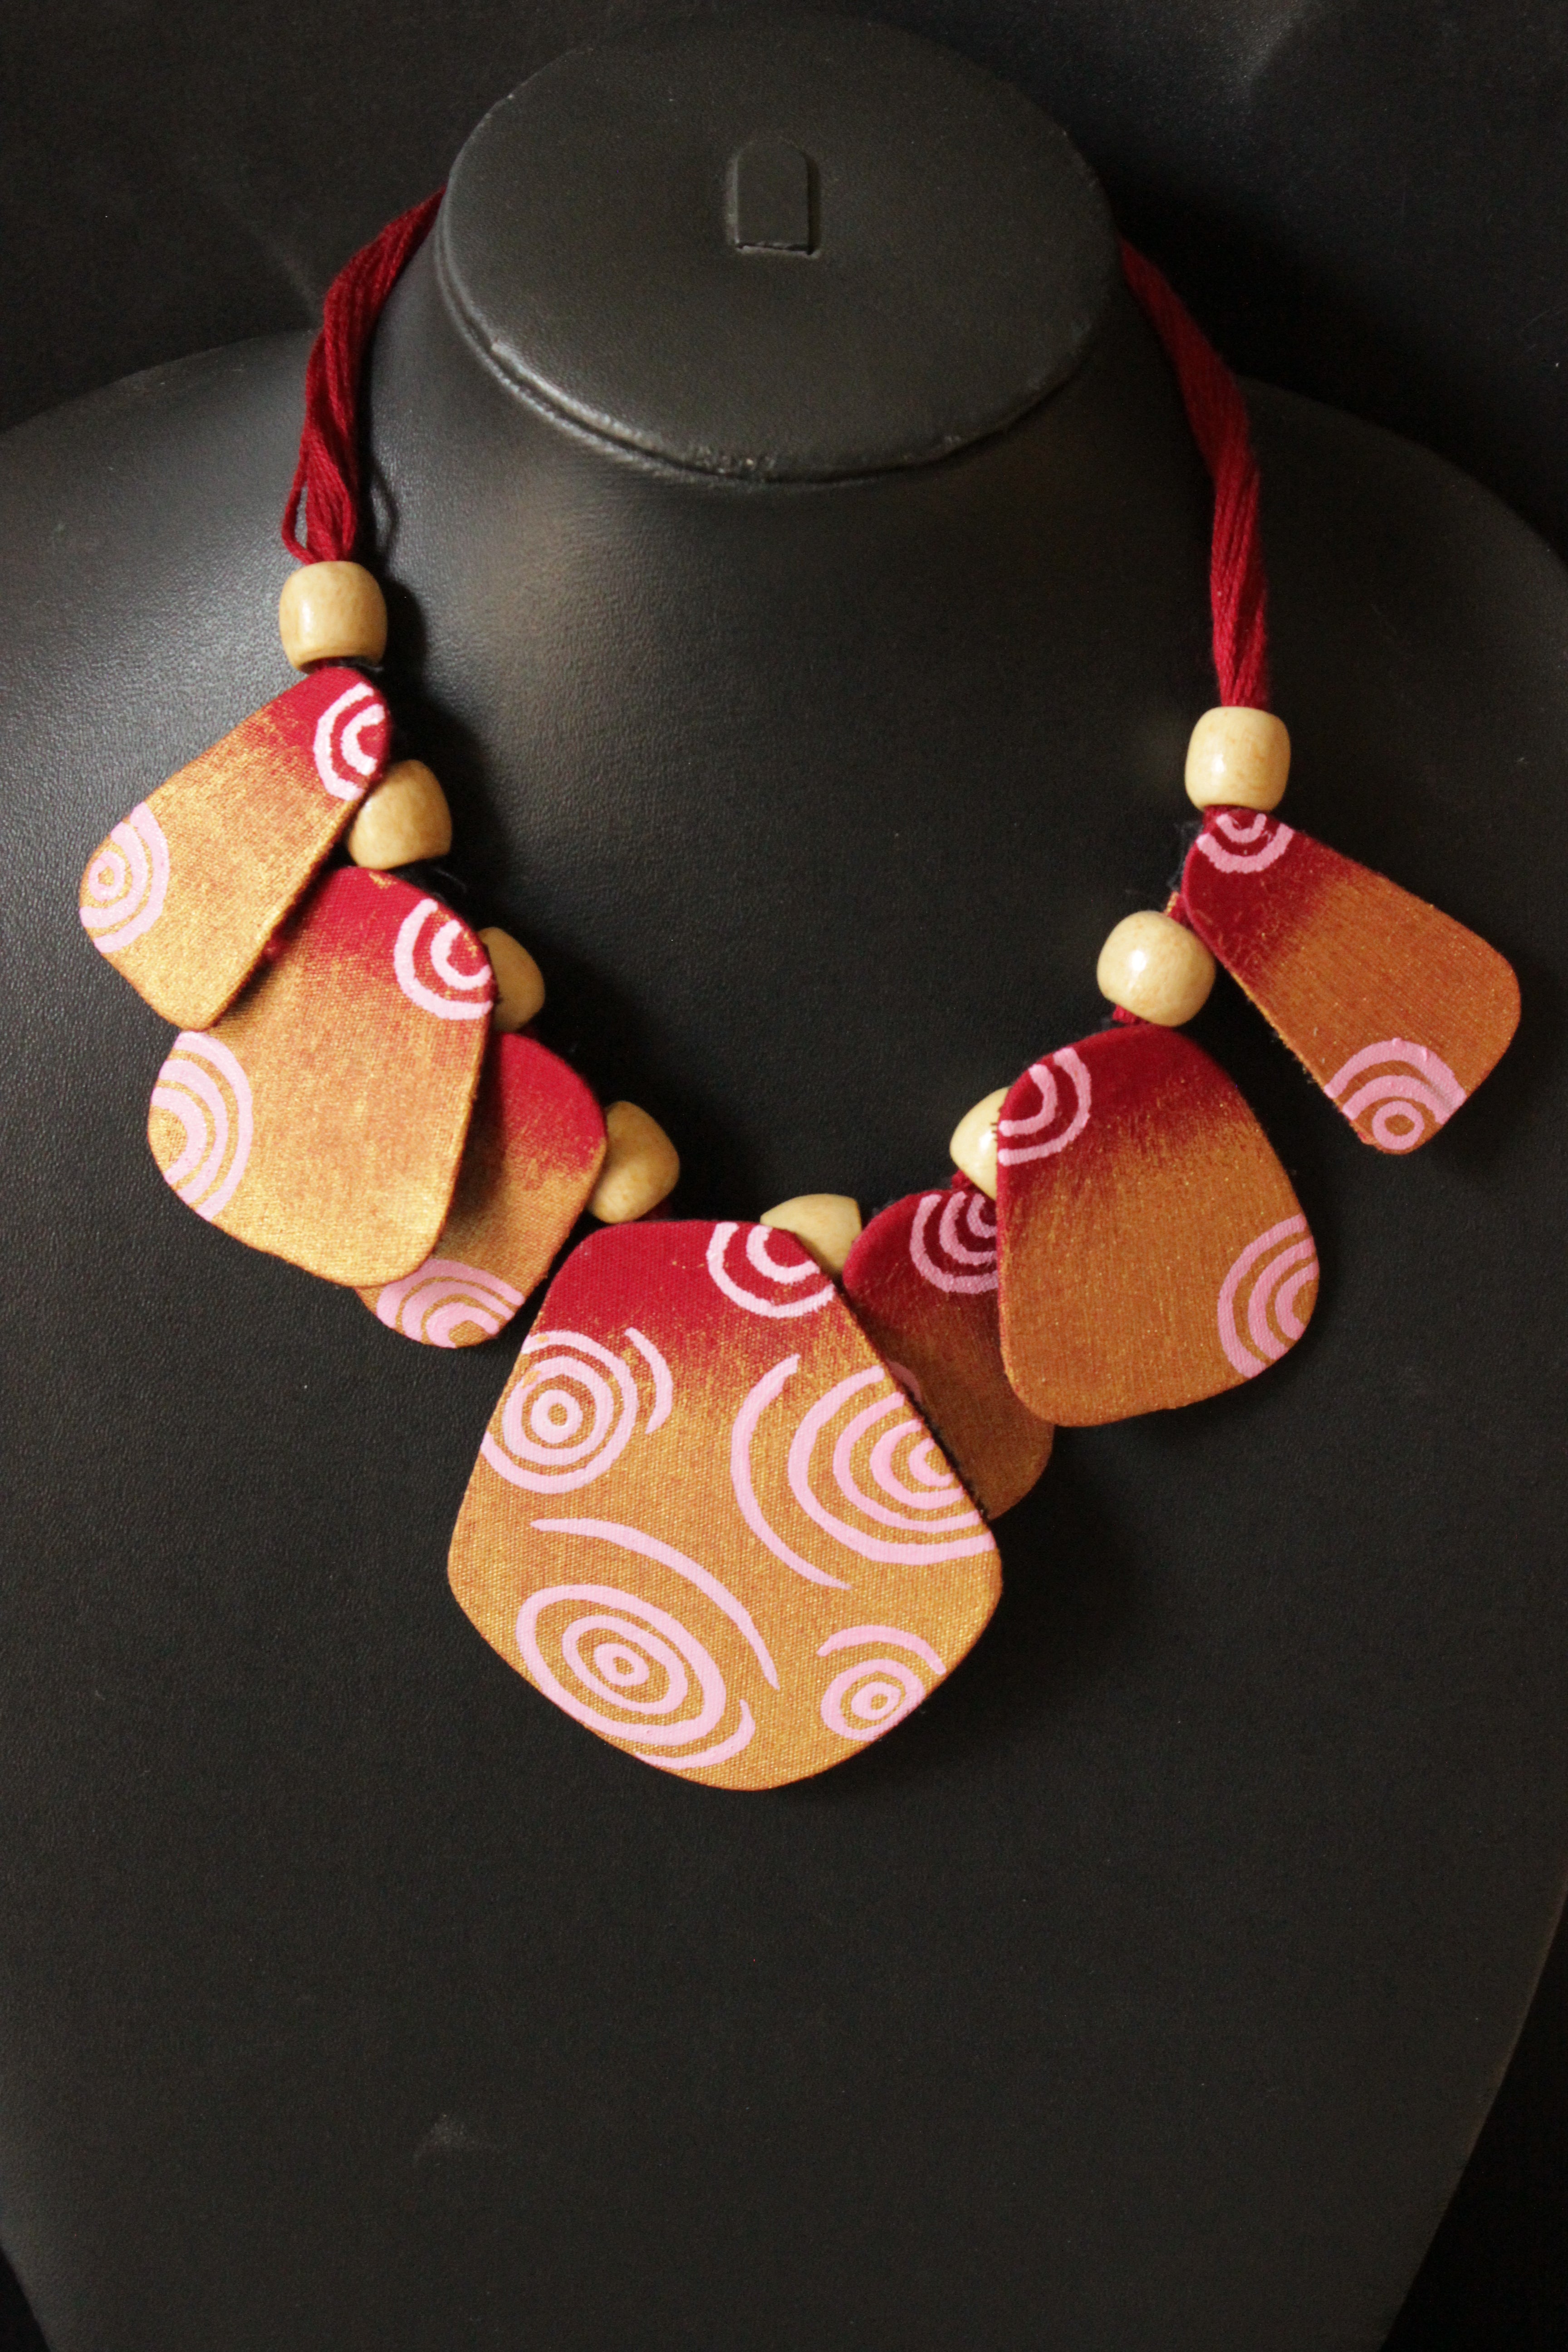 Handmade Fabric and Wooden Beads Necklace Set